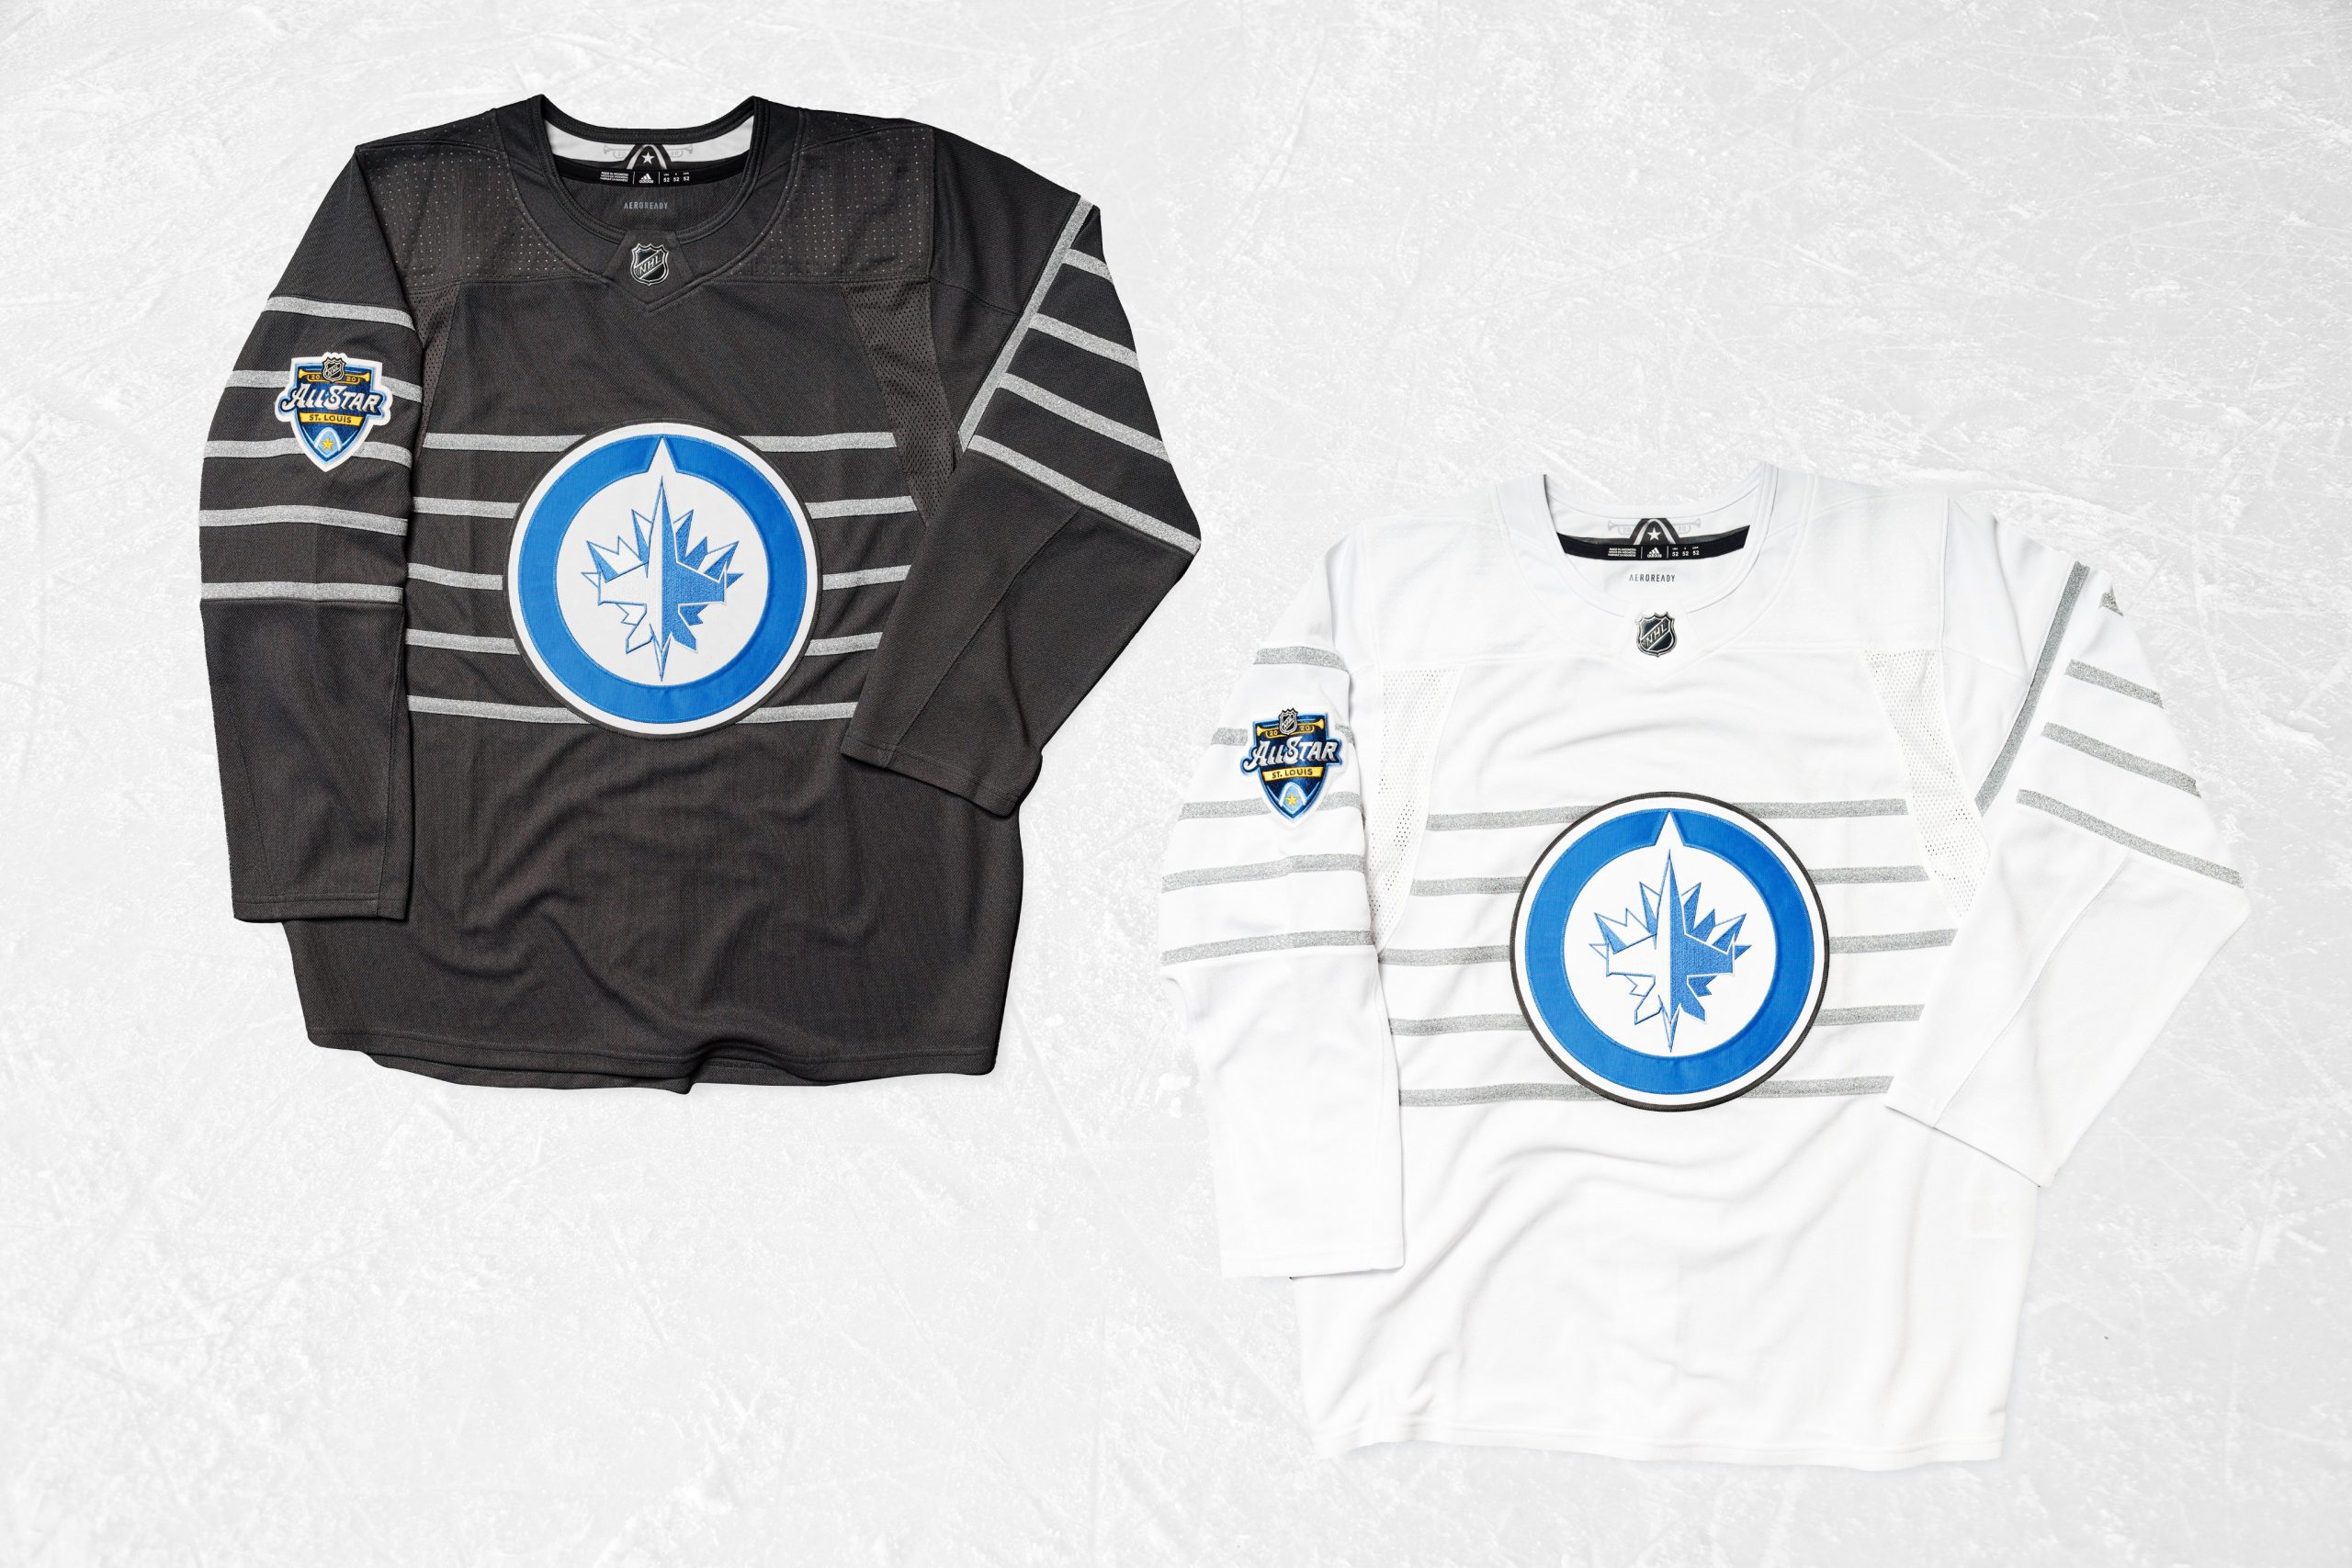 A look at the Winnipeg Jets jersey for the 2020 NHL All-Star Game